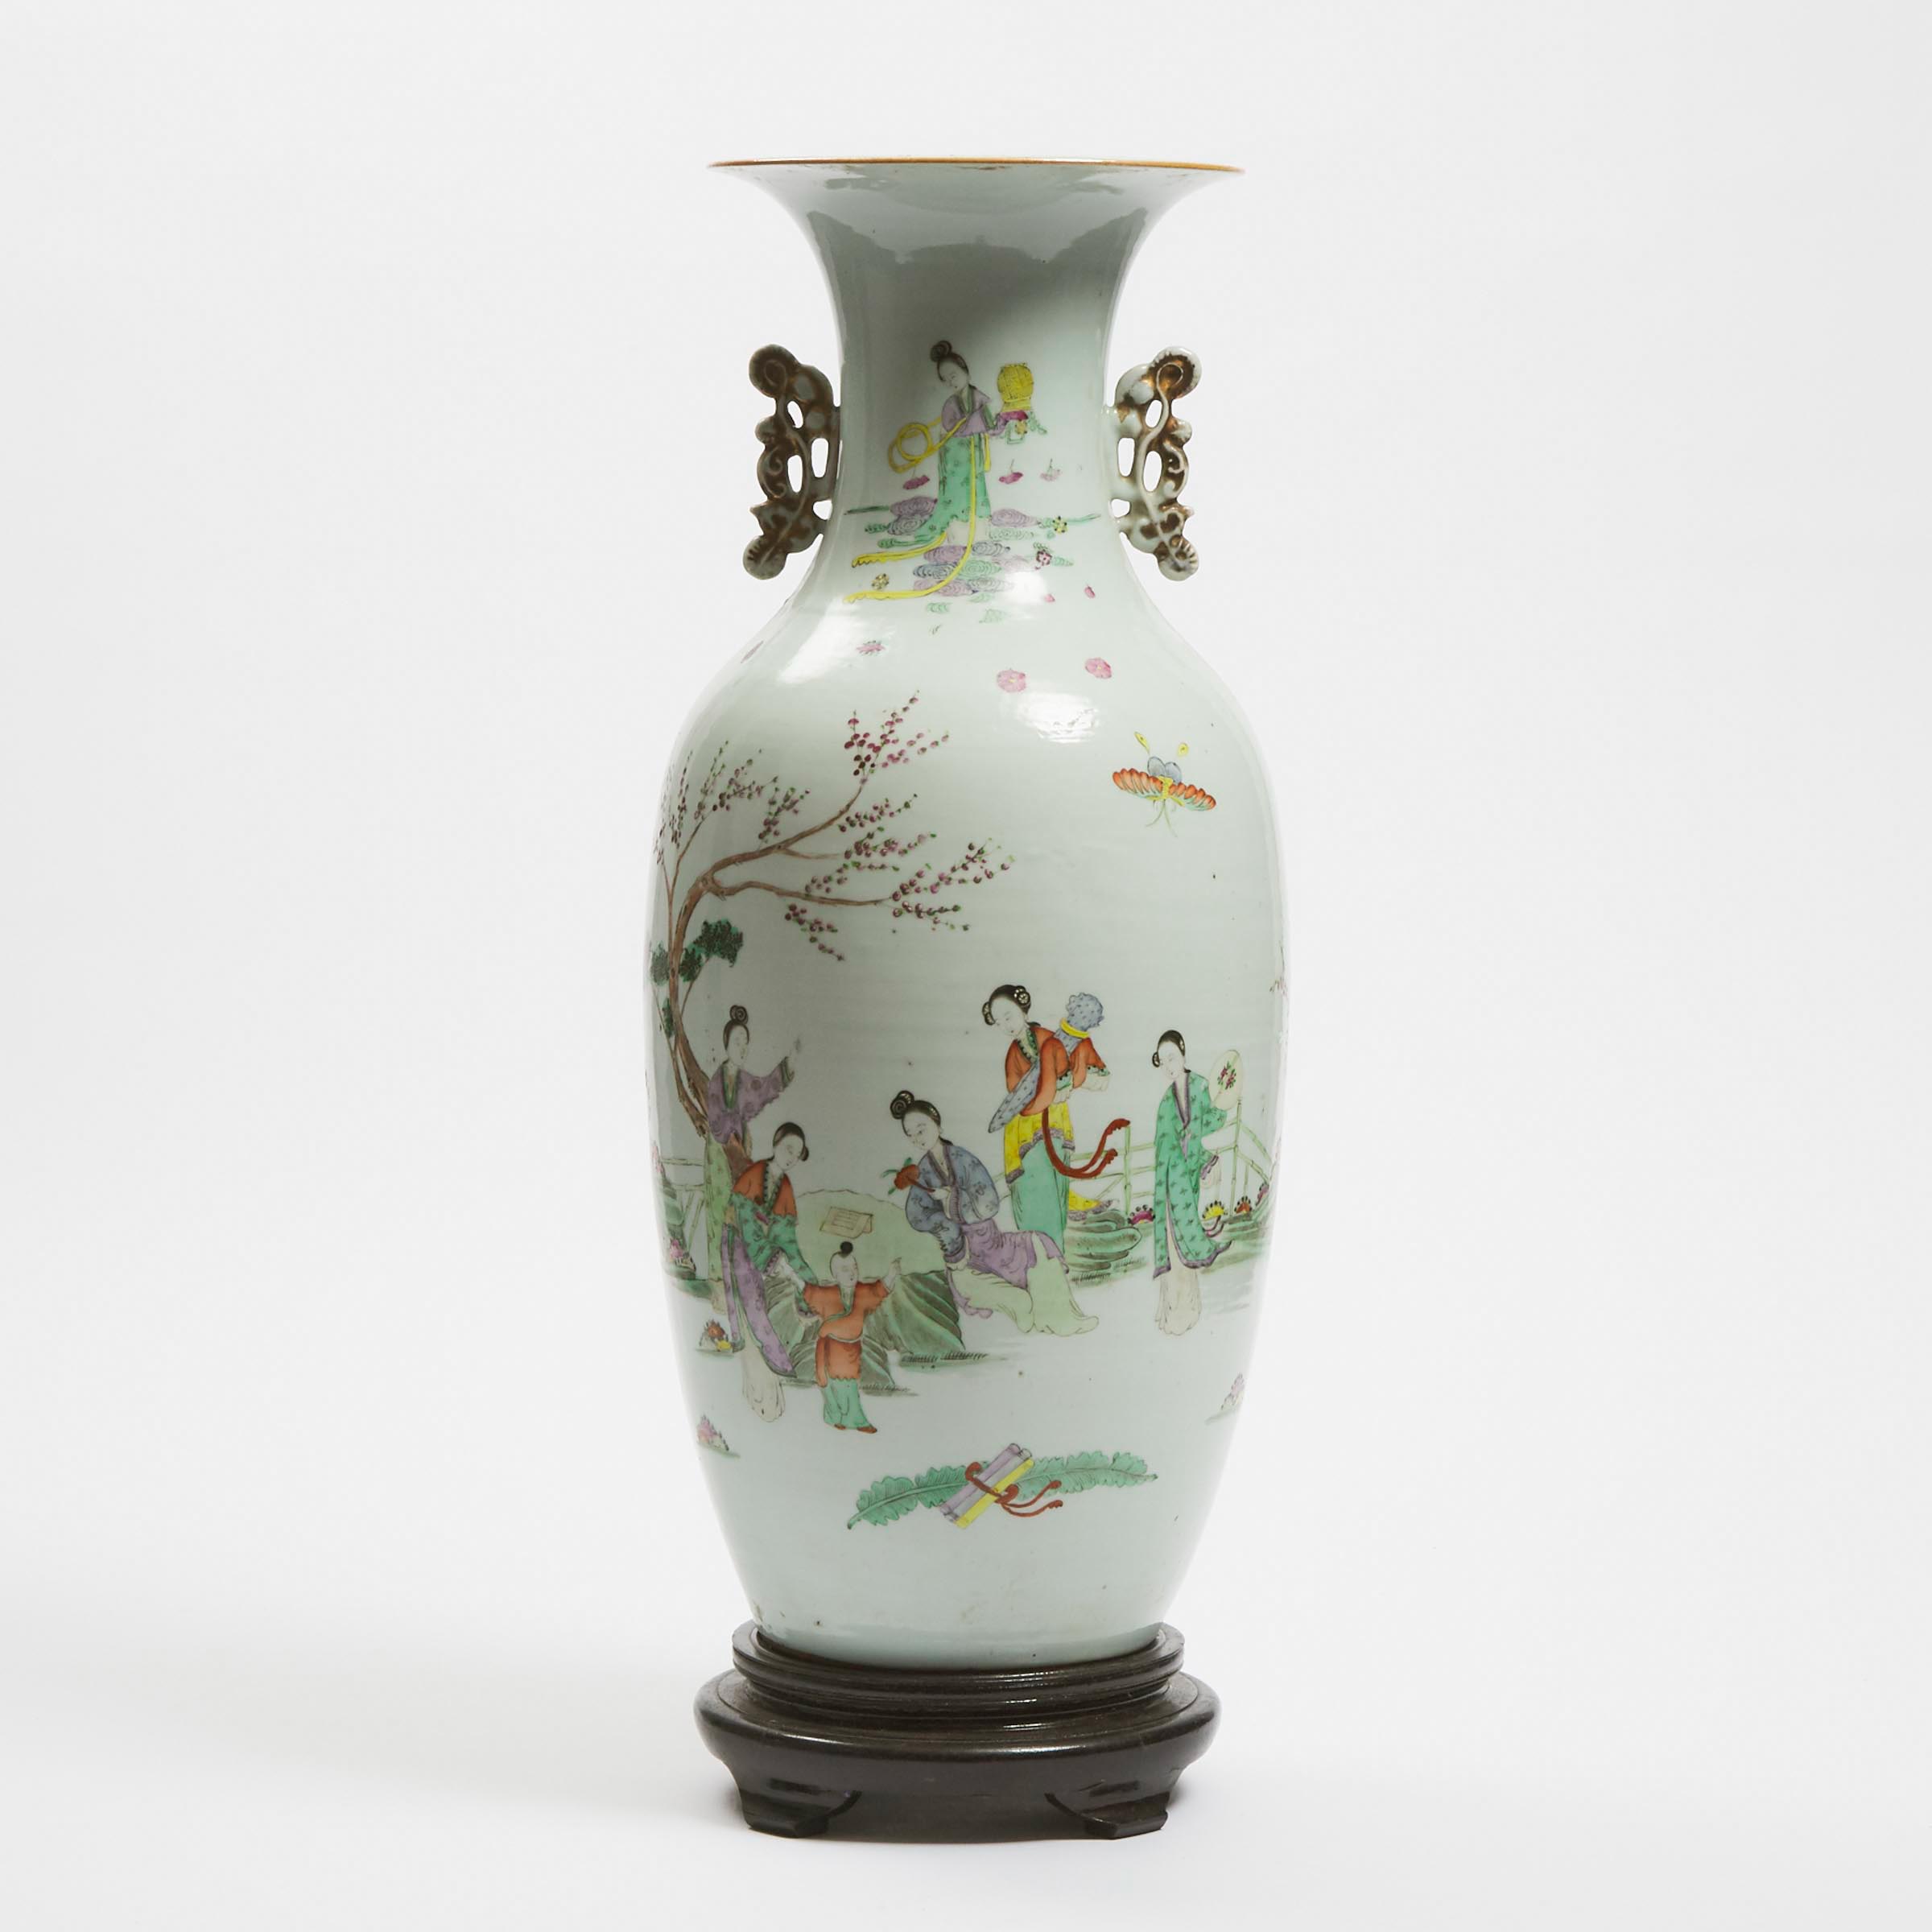 A Famille Rose Baluster Vase, Zhushan, Republican Period